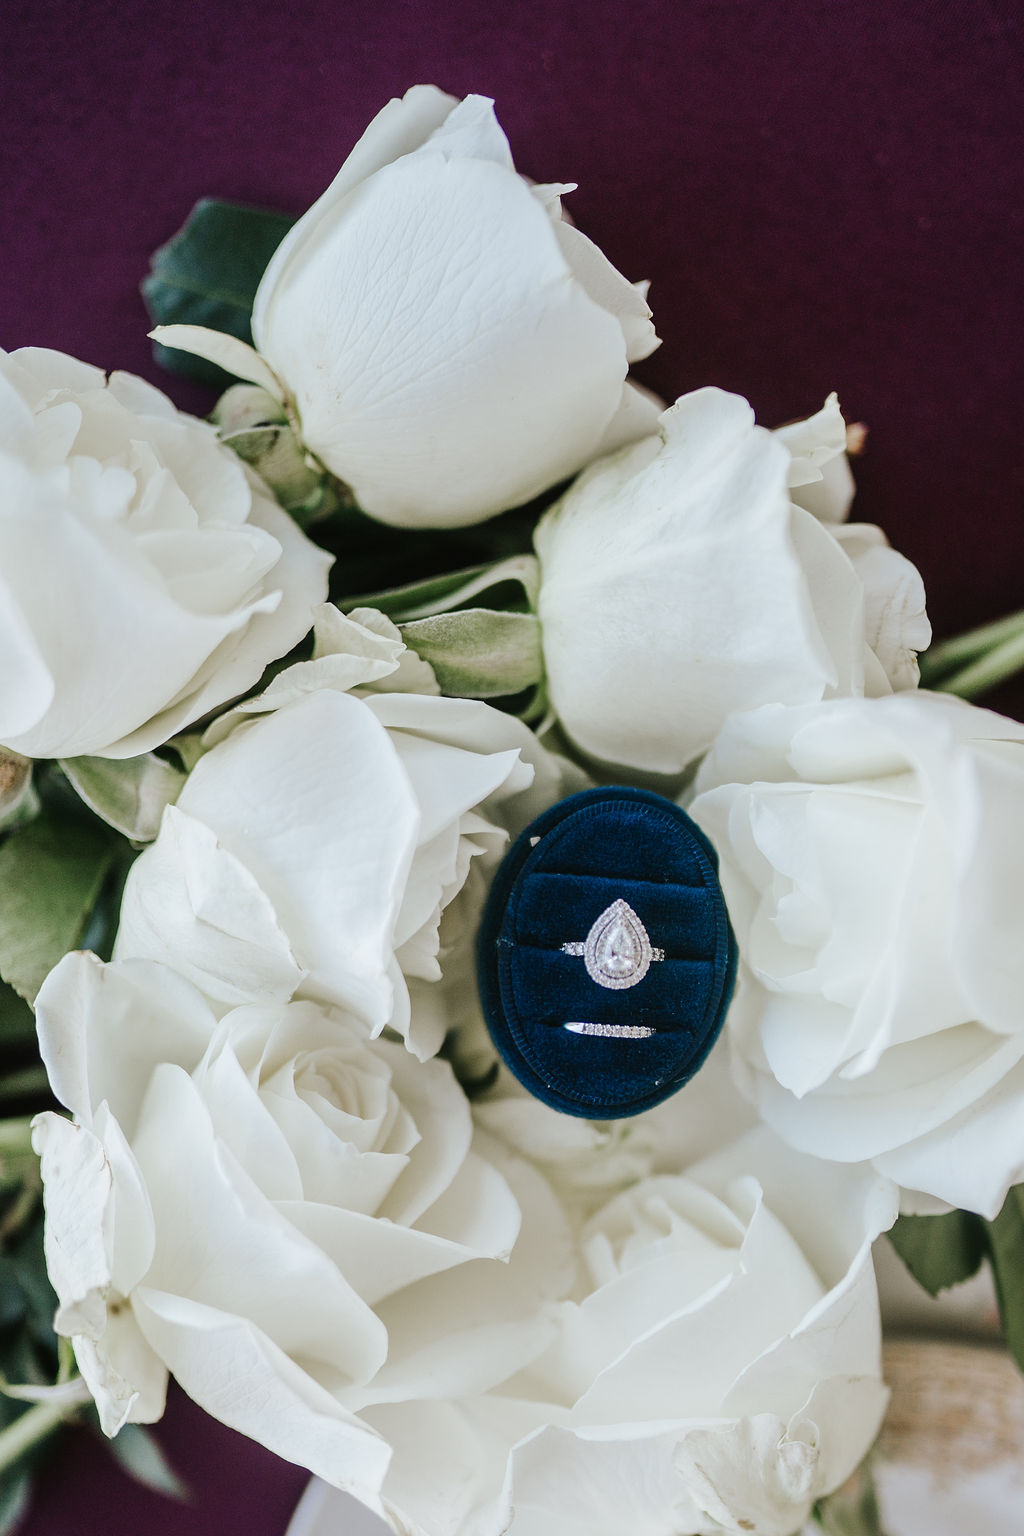 wedding ring and engagement ring in a royal blue velvet box sitting on top of white roses for a wedding flatlay photo